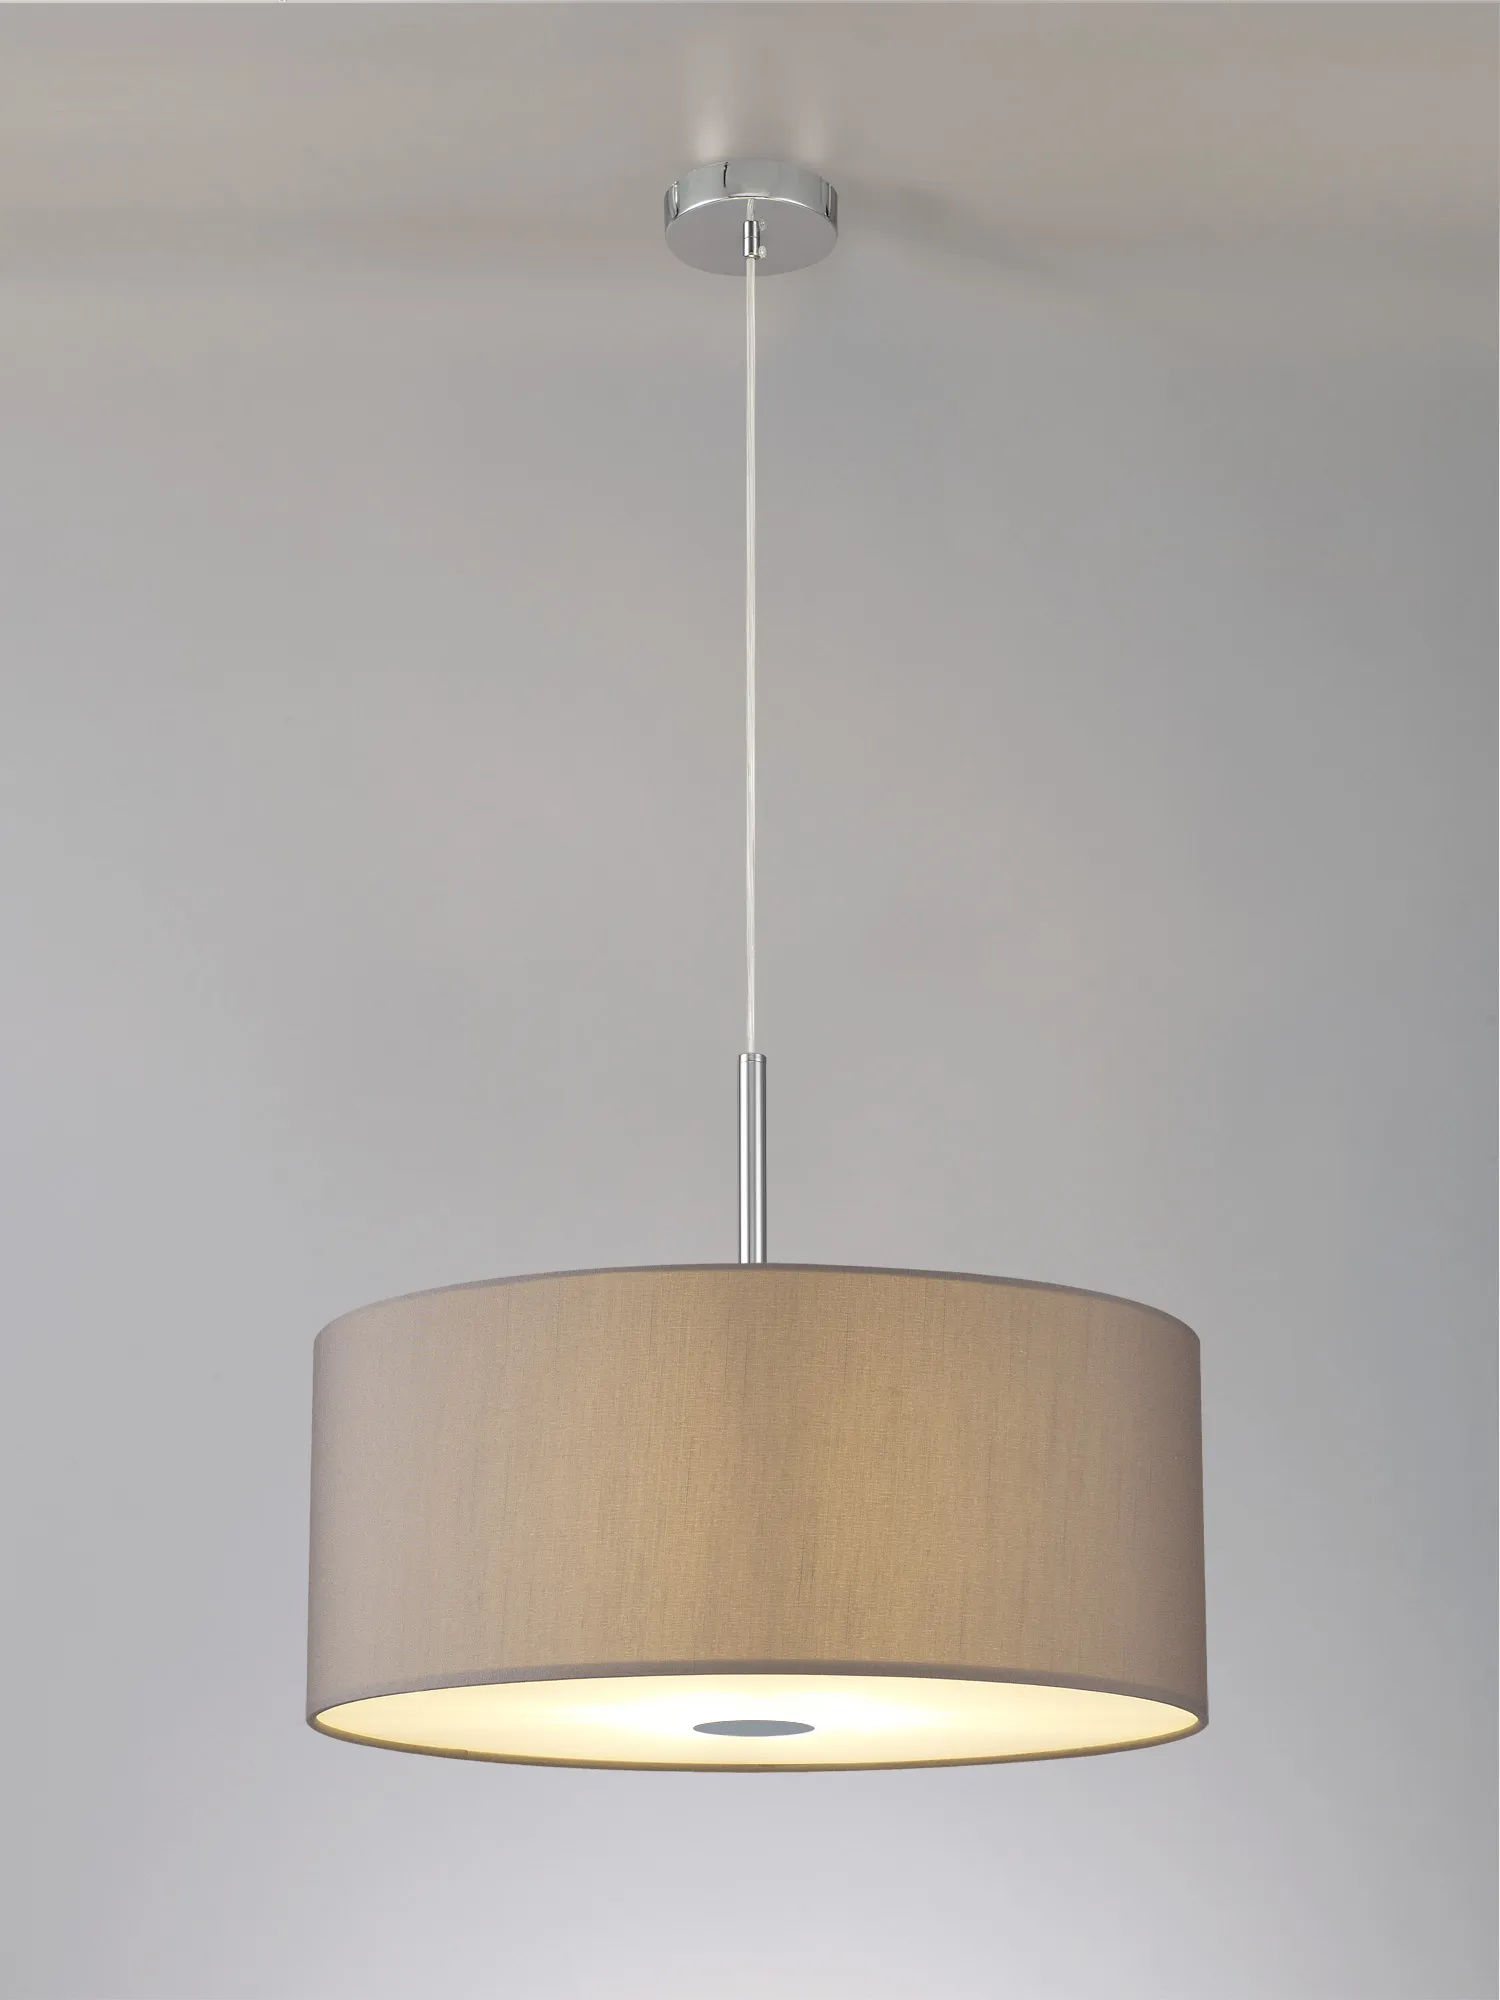 Baymont 60cm 5 Light Pendant Polished Chrome; Grey/White; Frosted Diffuser DK0482  Deco Baymont CH GR